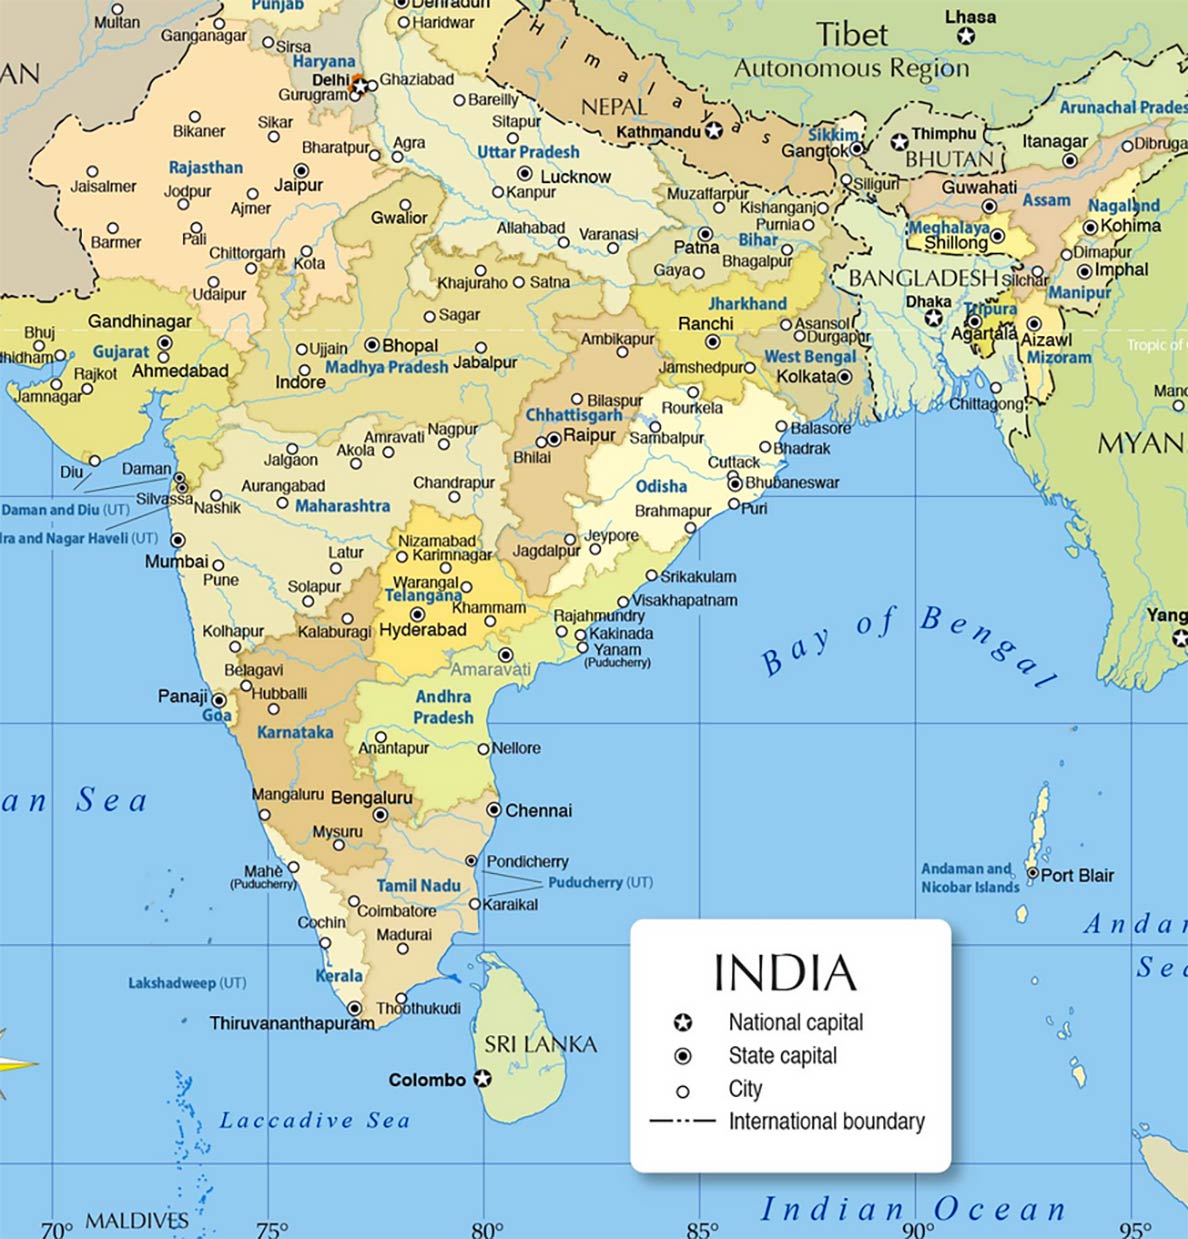 India - A Country Profile - Nations Online Project